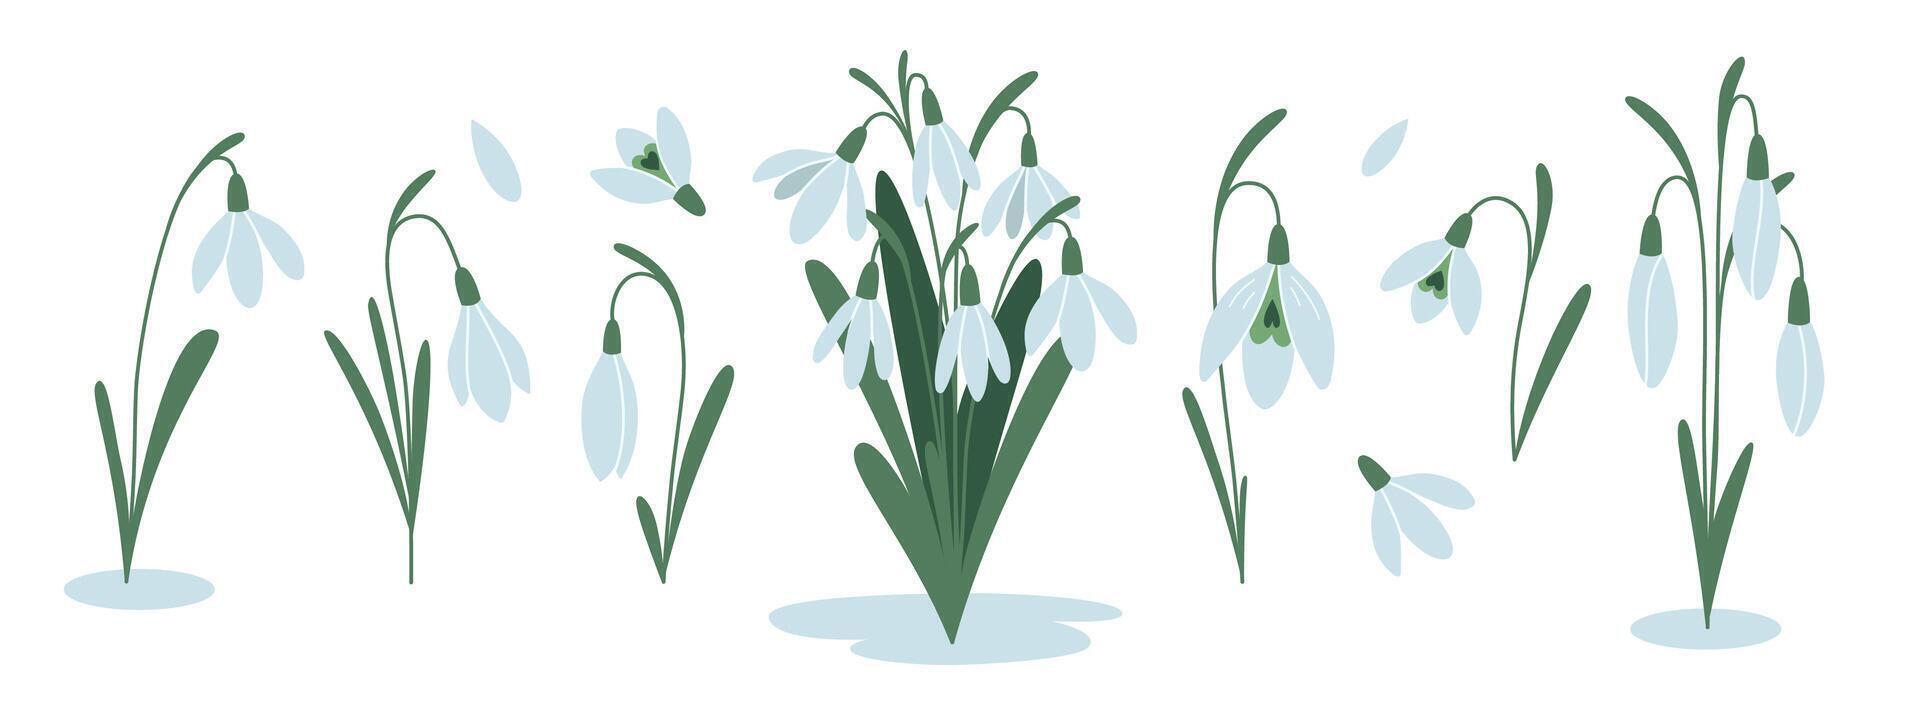 Set of snowdrops, first spring flowers, cartoon style. Trendy modern vector illustration isolated on white background, hand drawn, flat